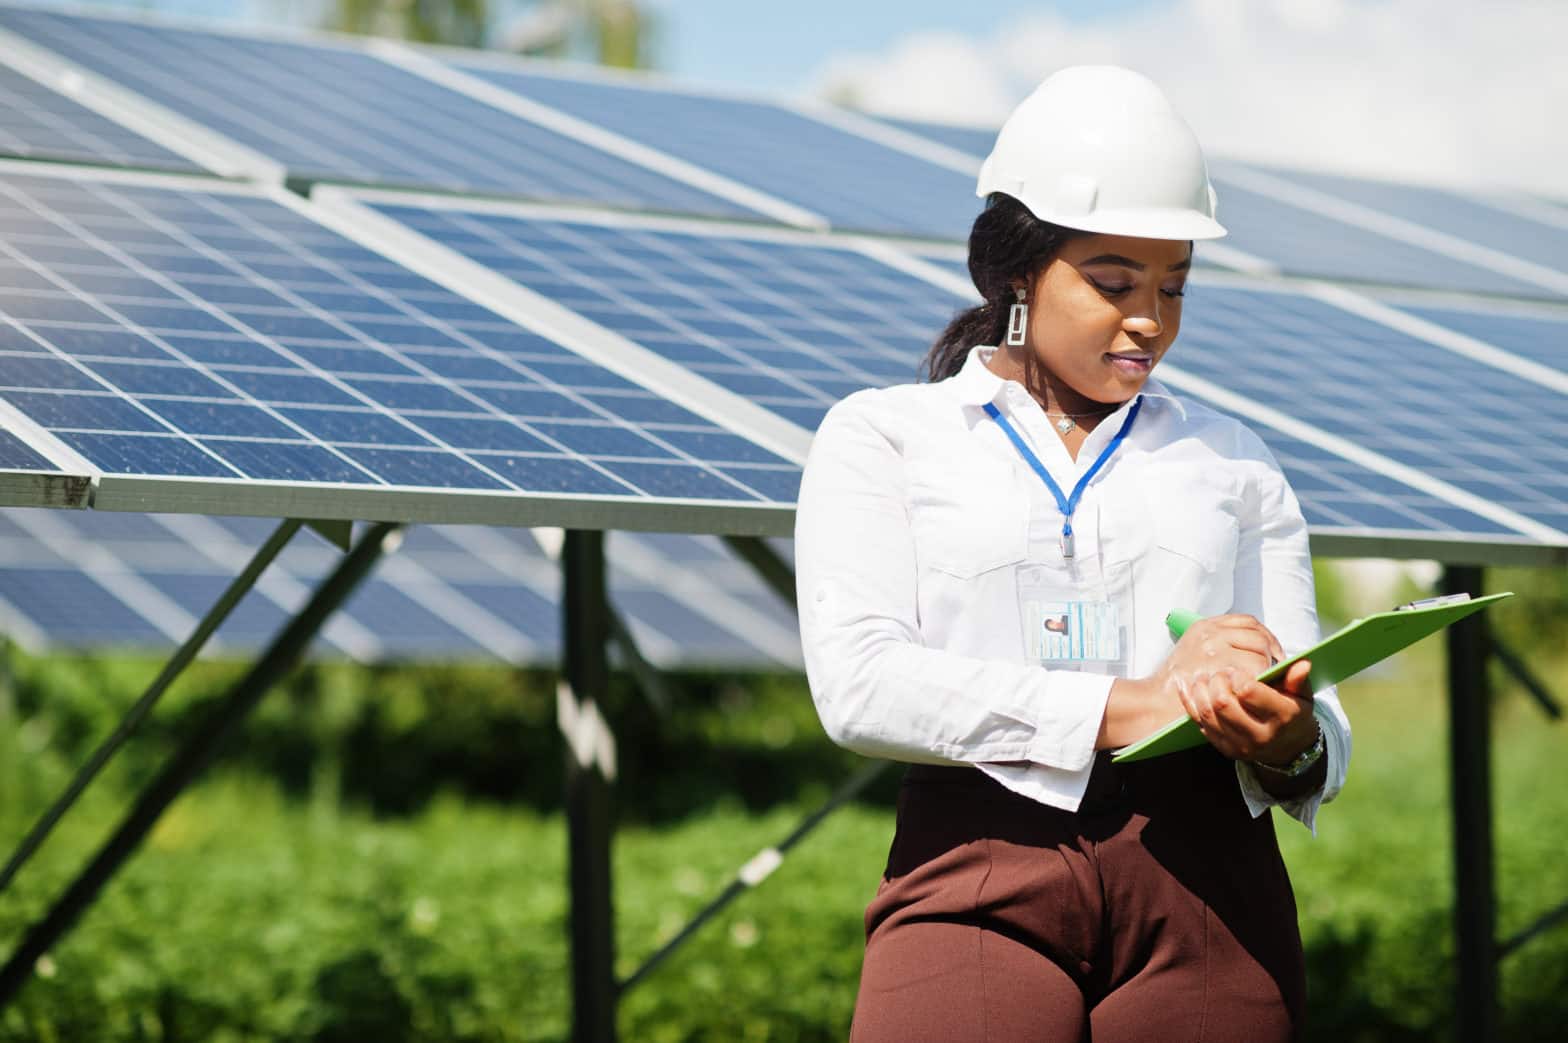 A female worker standing in front of solar panels writing on a notepad